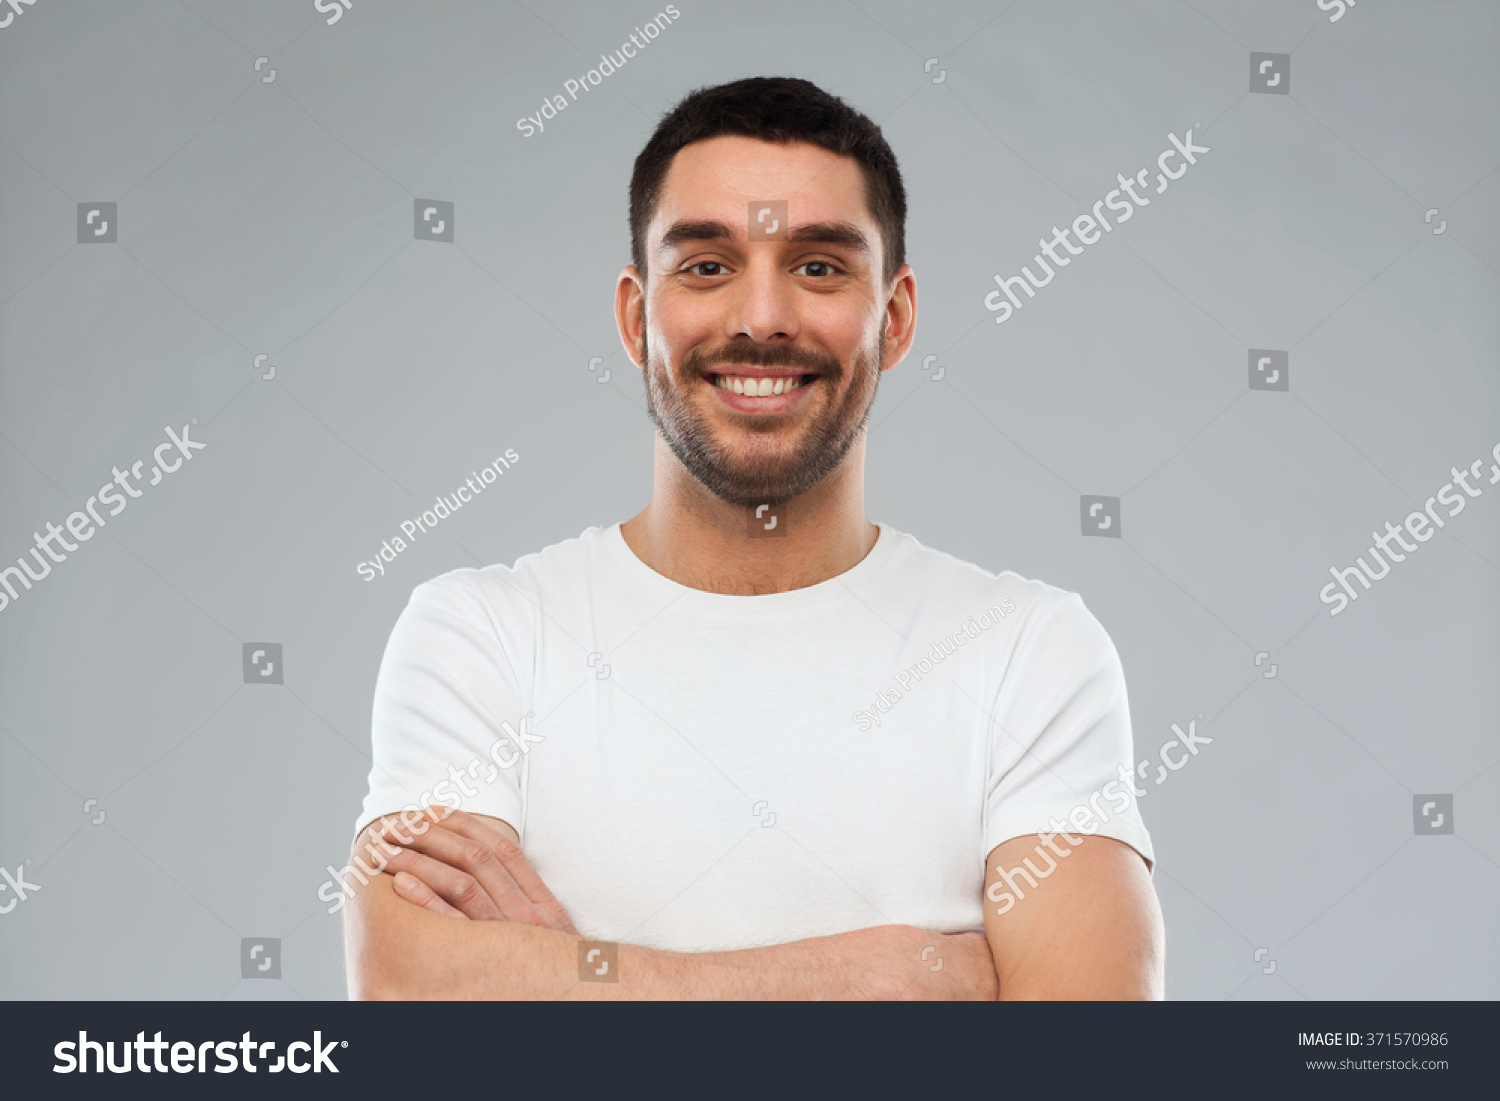 smiling man with crossed arms over gray background #371570986